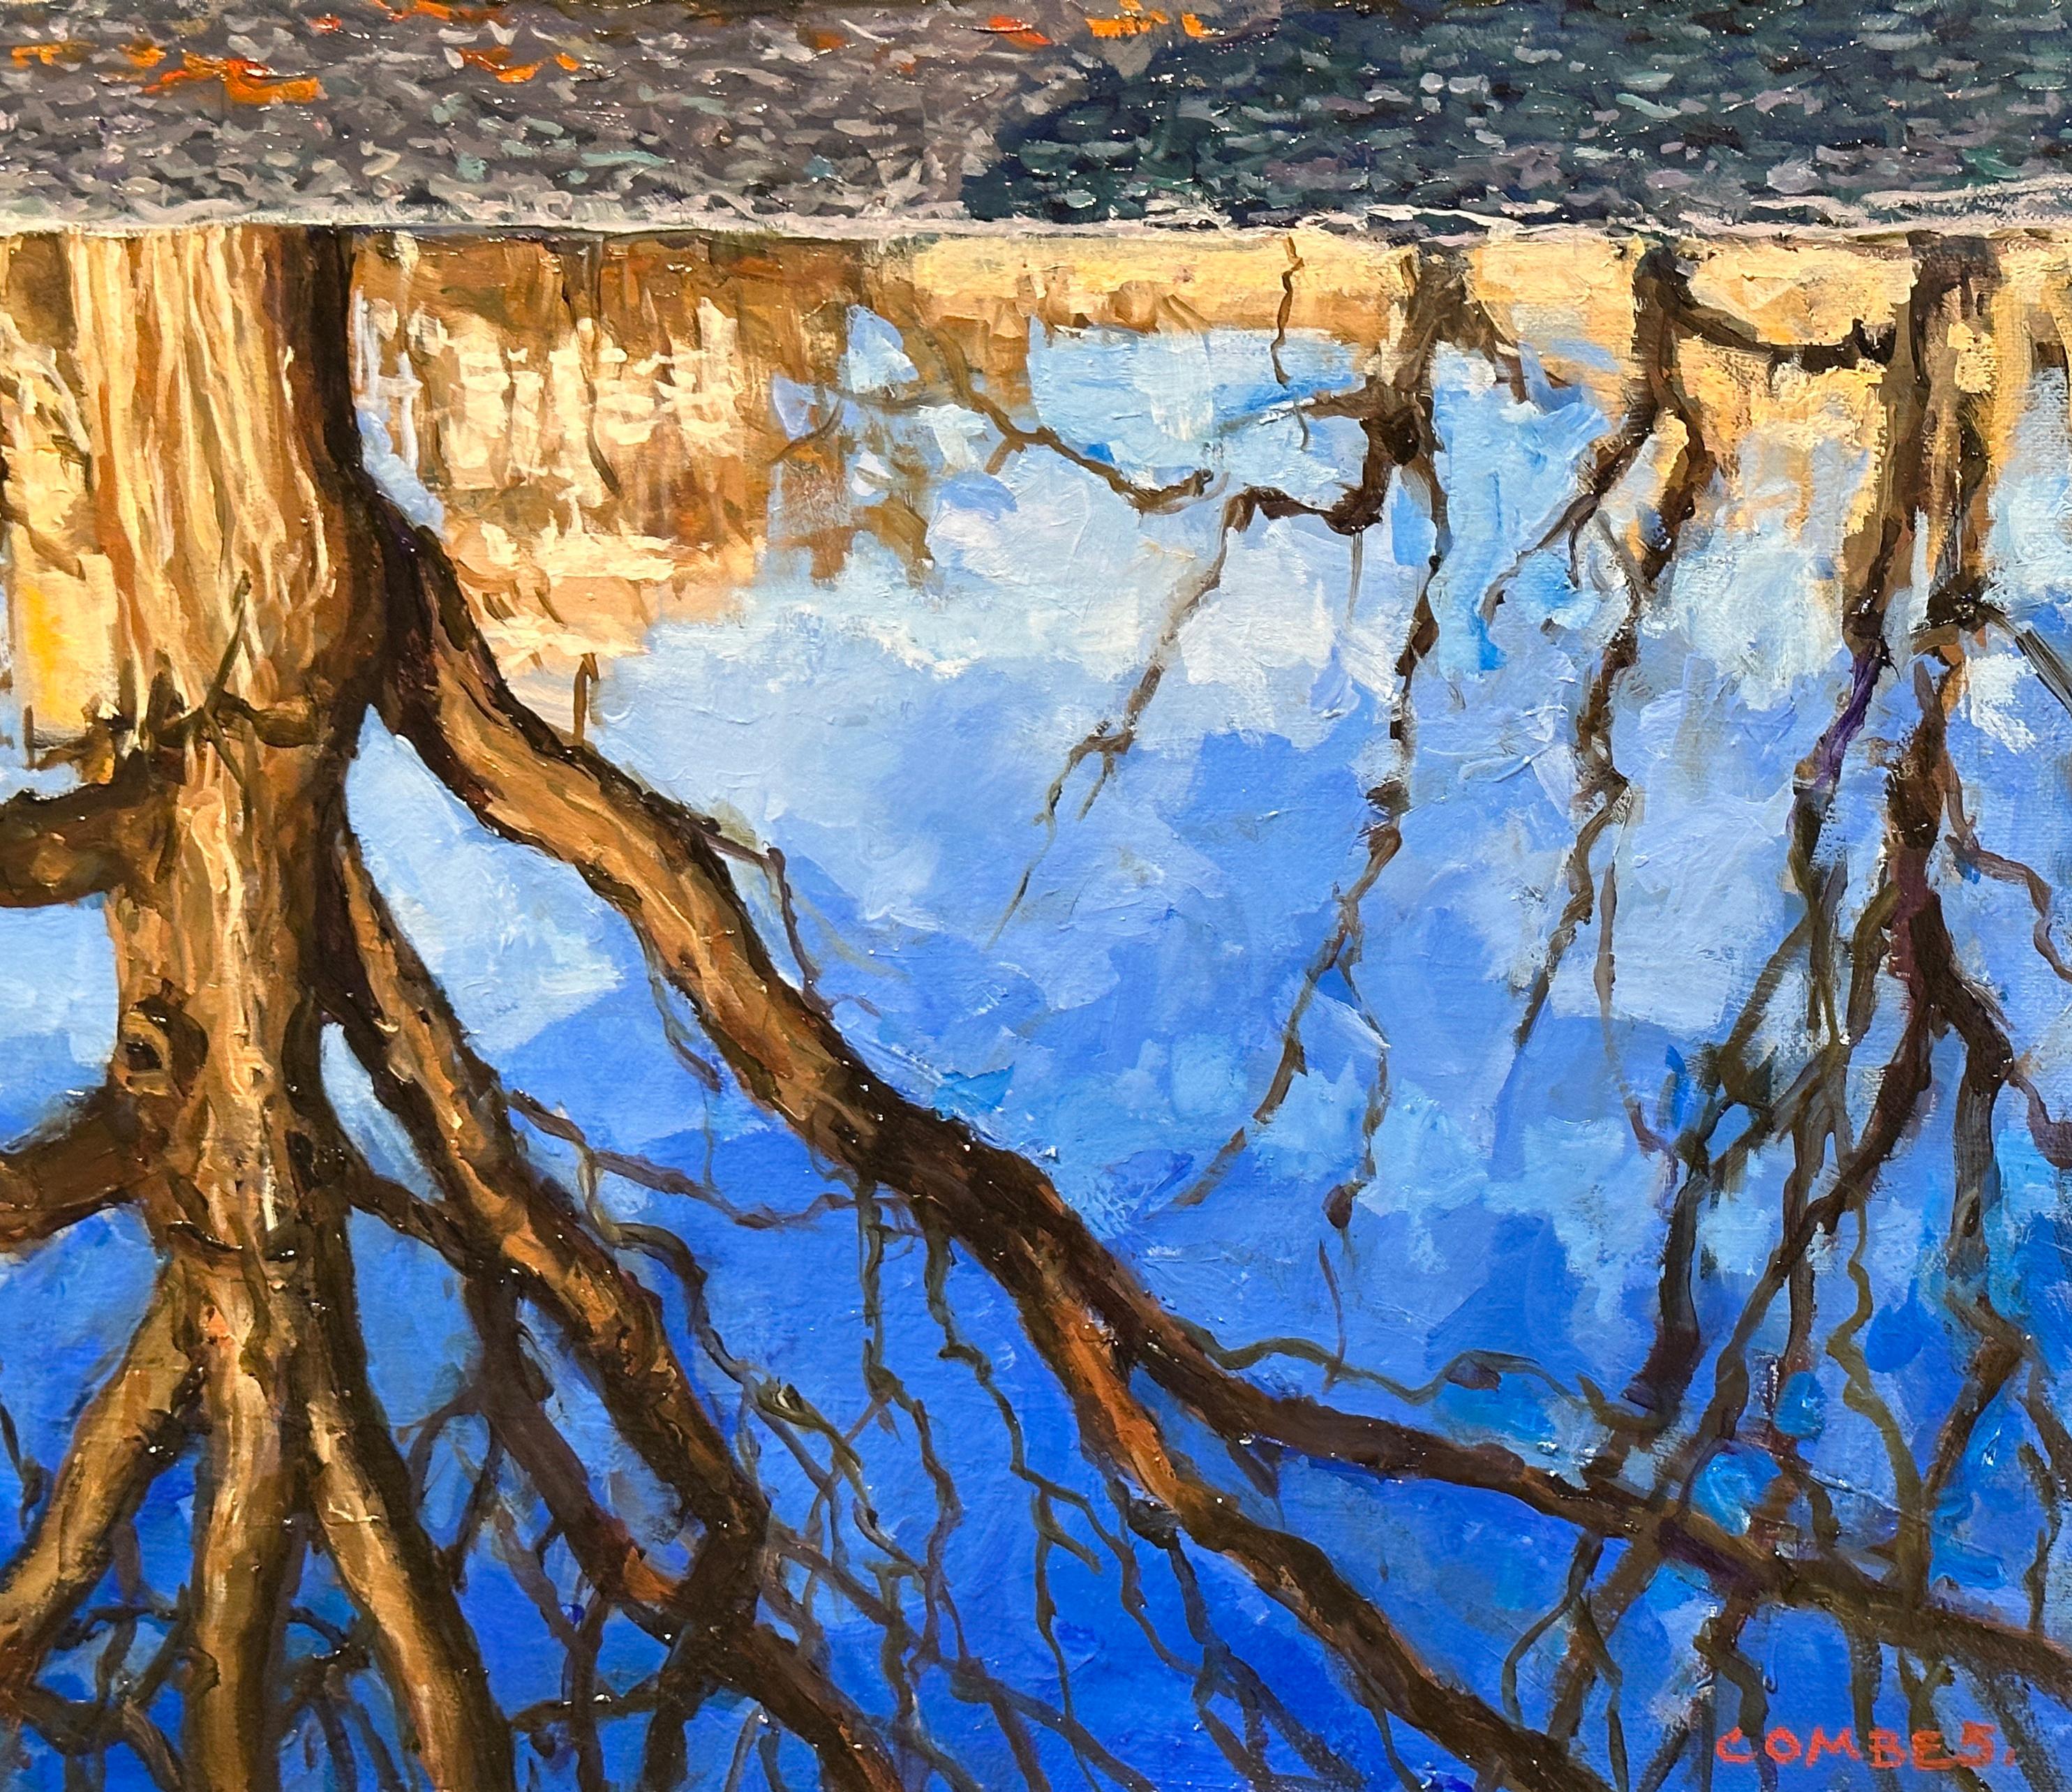 CENTRAL PARK REFLECTION - Contemporary Realism / New York City Landscape 1